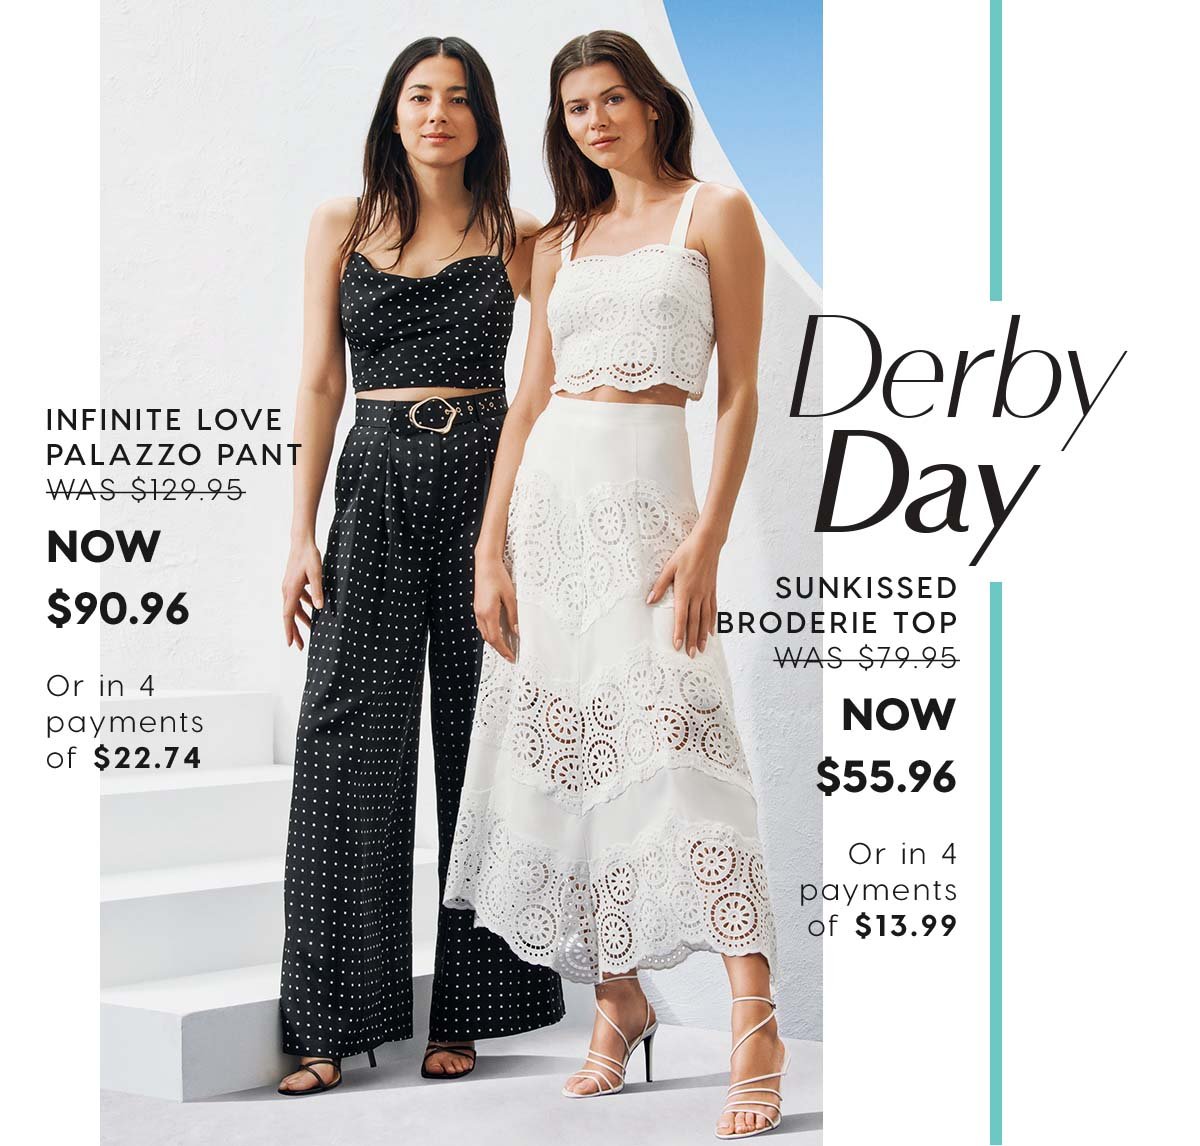 Derby Day. Infinite Love Palazzo Pant WAS $129.95 NOW $90.96  Or in 4 payments of $22.74. Sunkissed Broderie Top  WAS $79.95 NOW $55.96  Or in 4 payments of $13.99